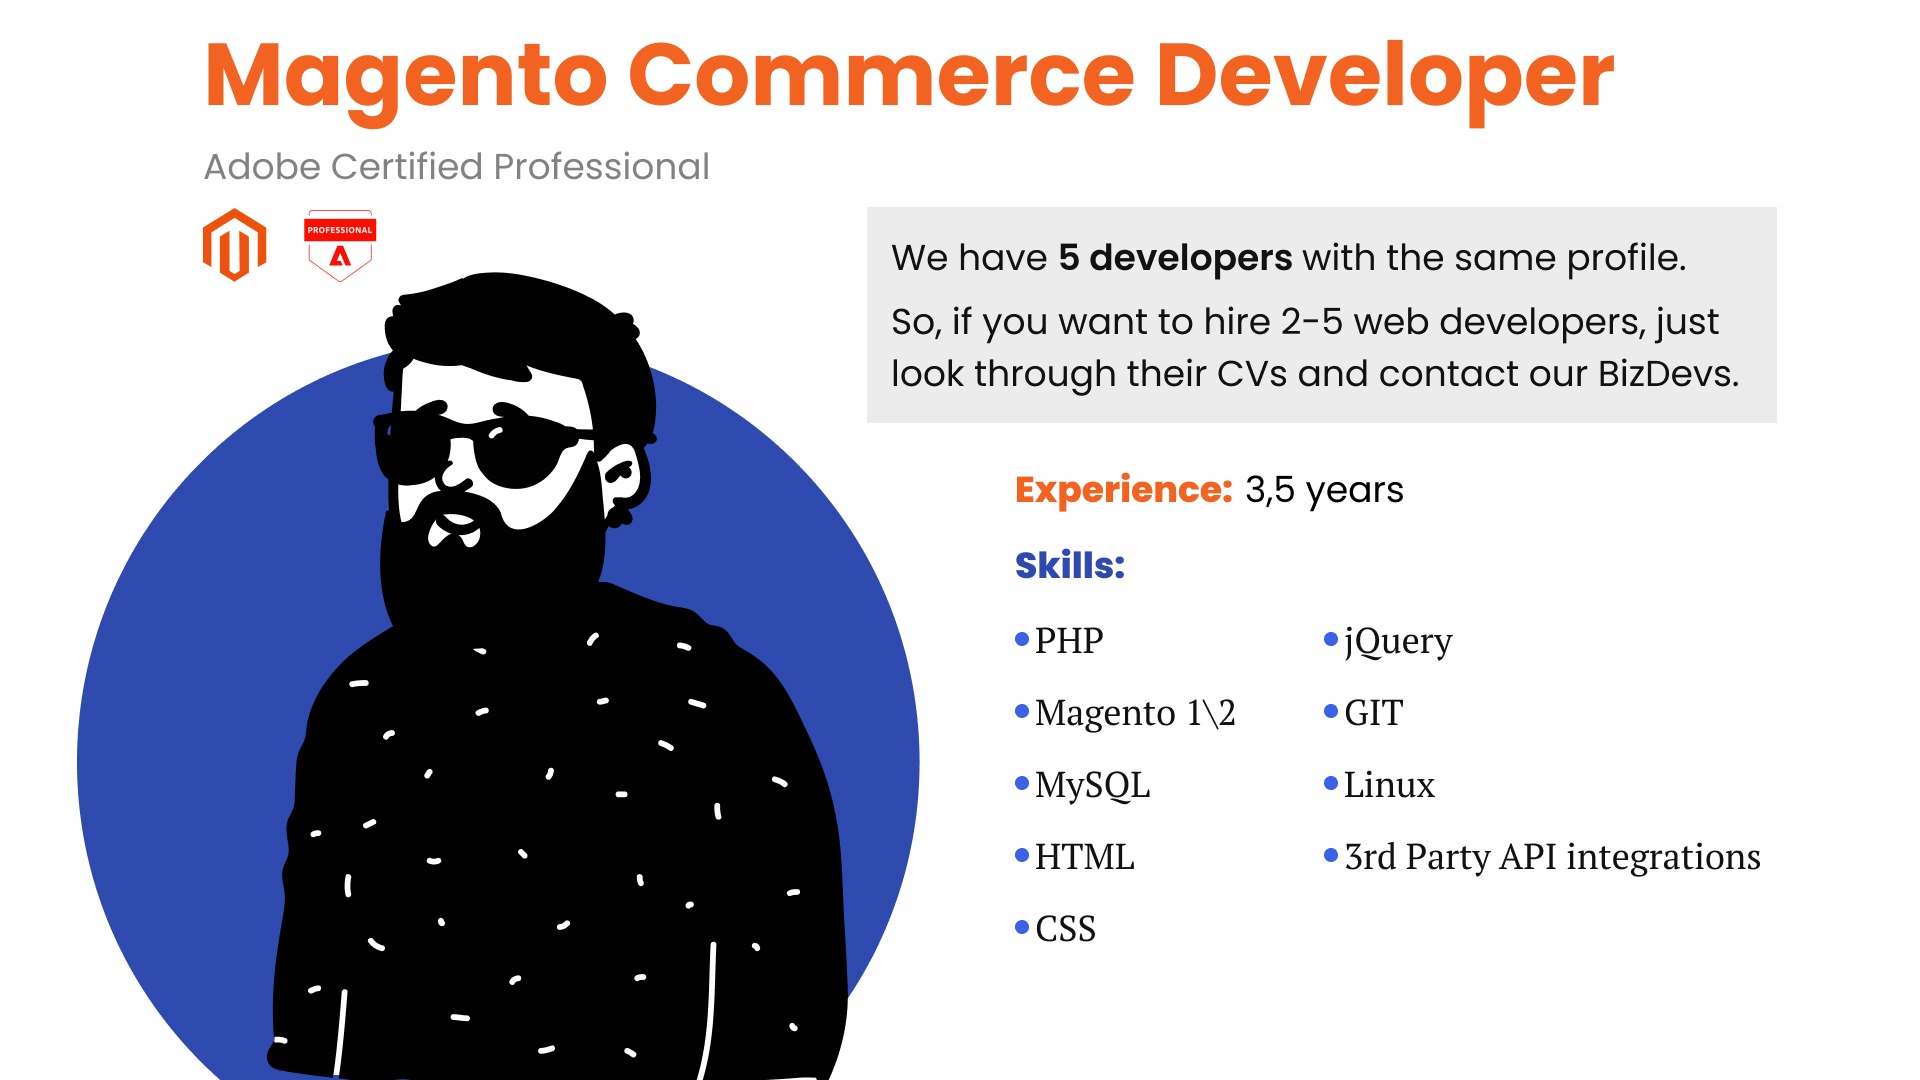 Magento eCommerce Cost - Adibe Certified Developer's Rate